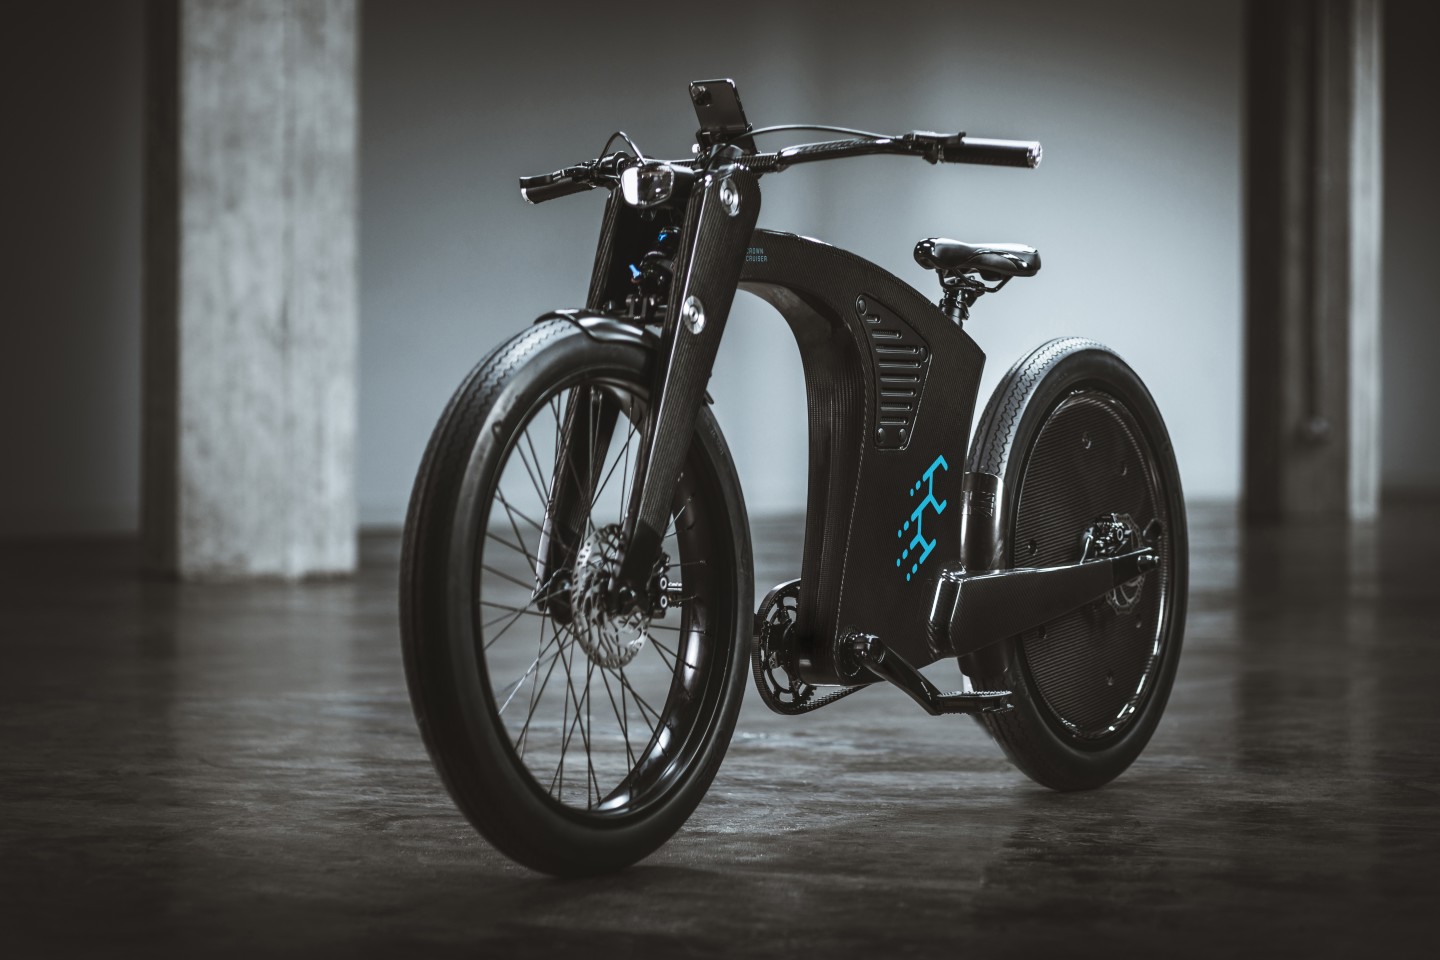 The CrownCruiser ebike rides on chunky 26-inch tires